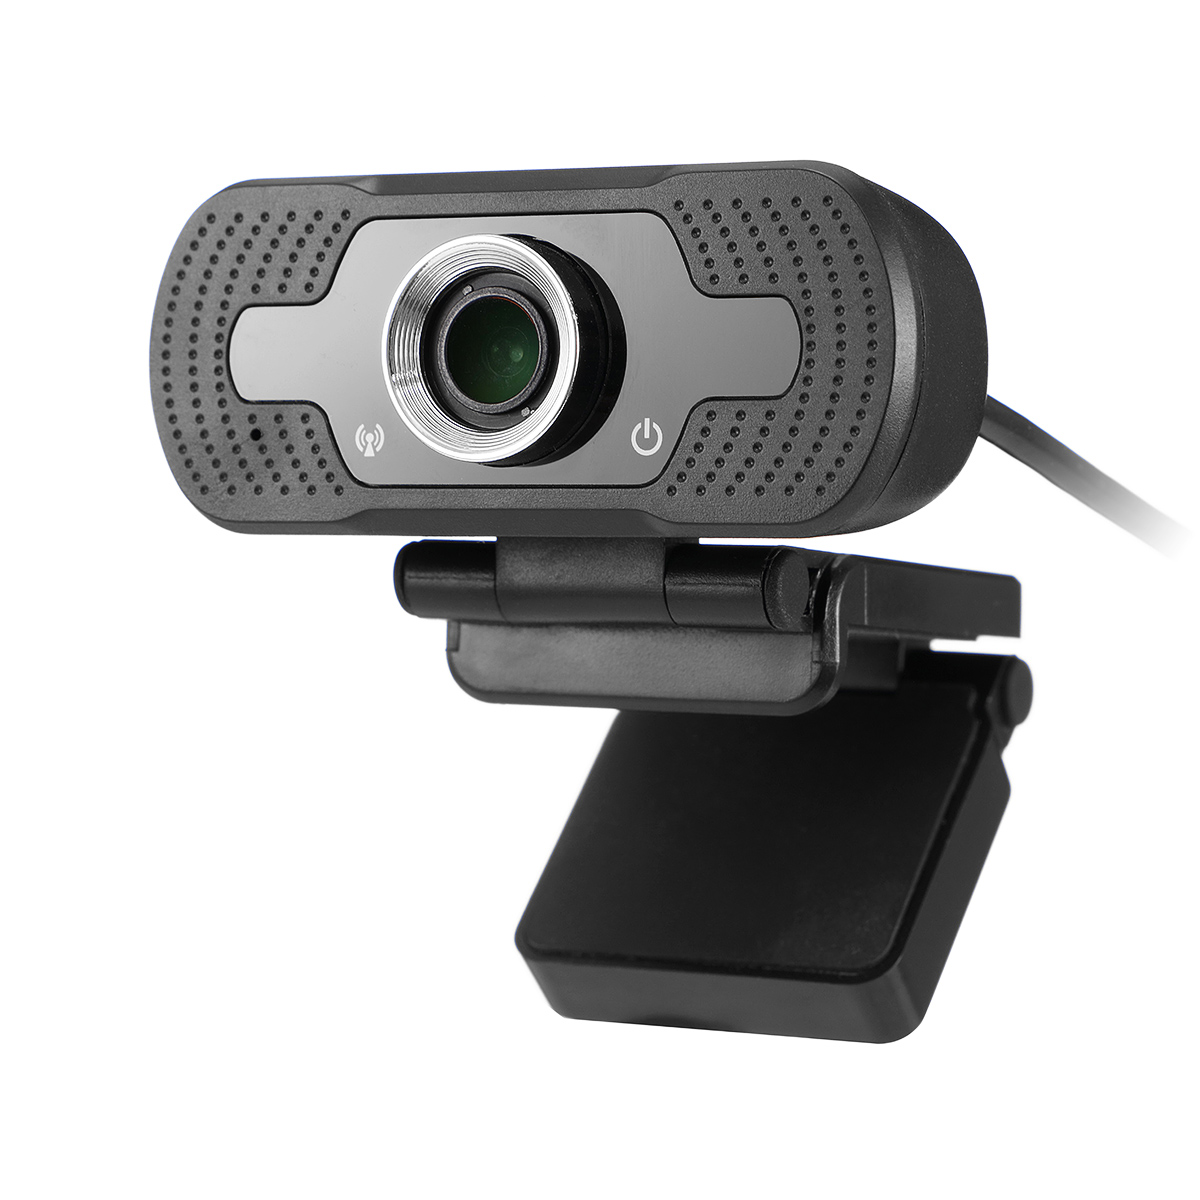 Find SAWAKE 1080P HD Webcam Auto-Focus 30FPS USB Wired Foldable Computer Camera with Built-in Microphone for Sale on Gipsybee.com with cryptocurrencies